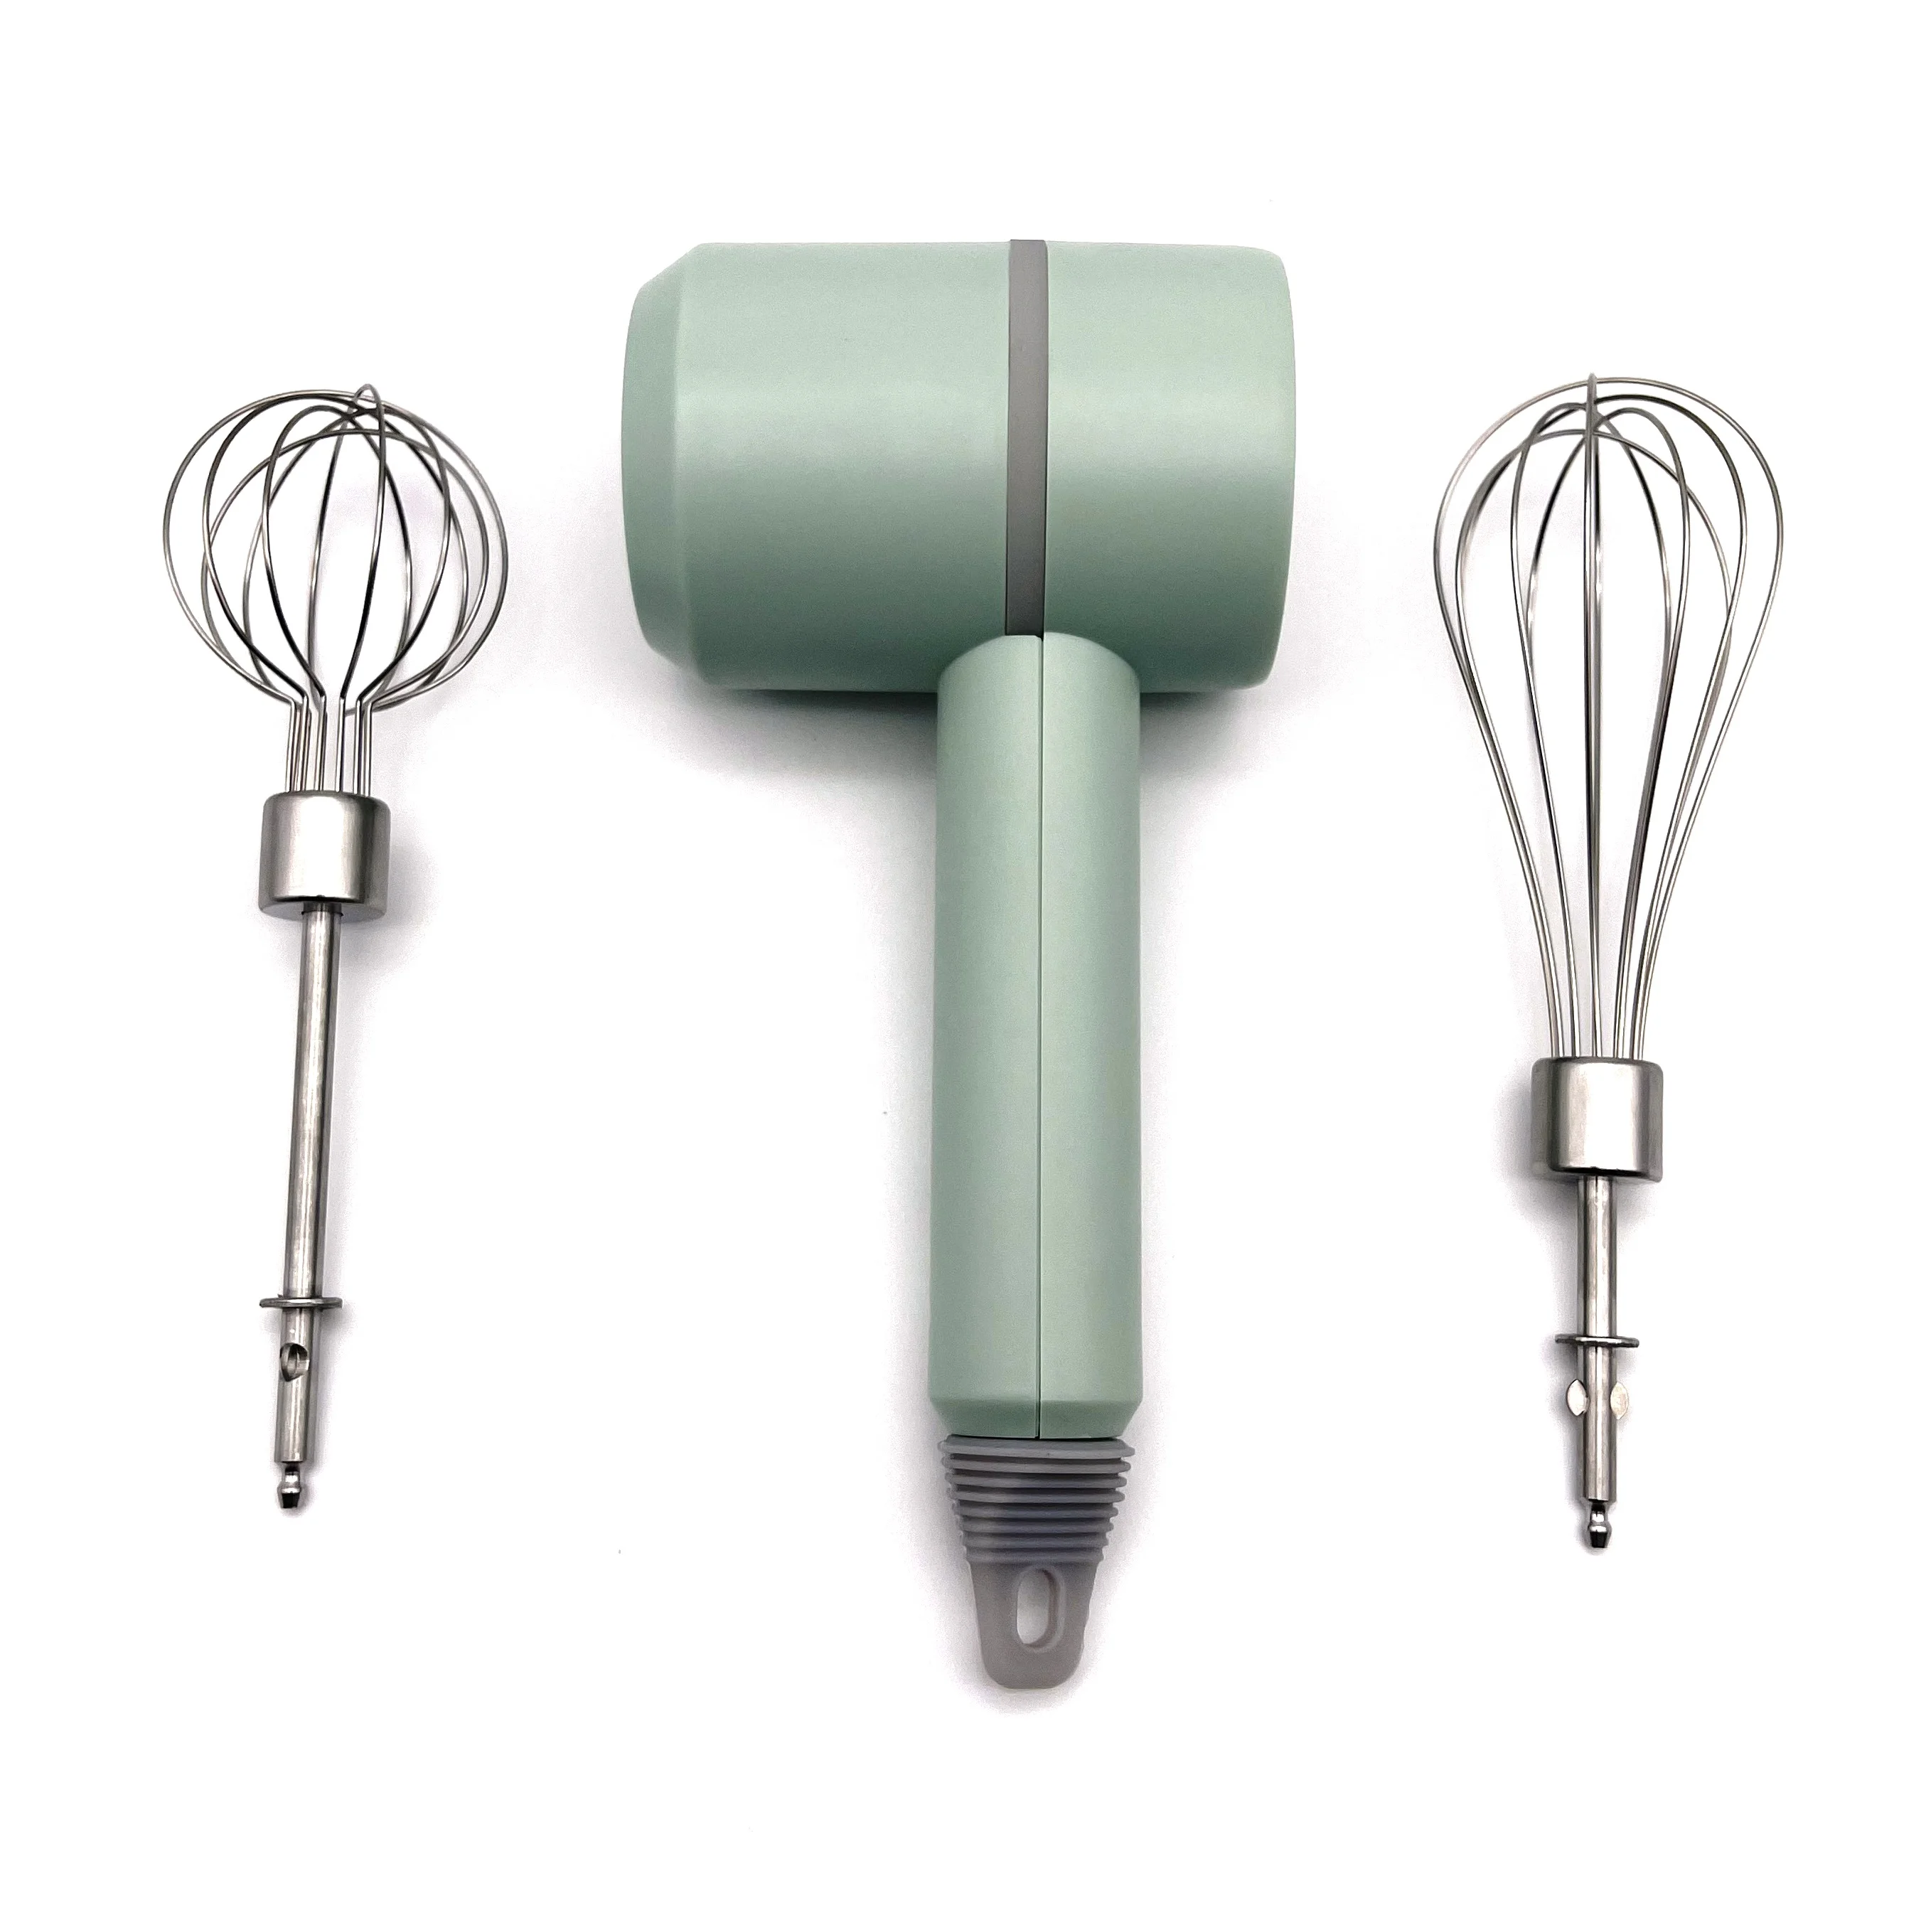 Electric Egg Beater Hand Held Mixer Whisk Mini Battery Operated